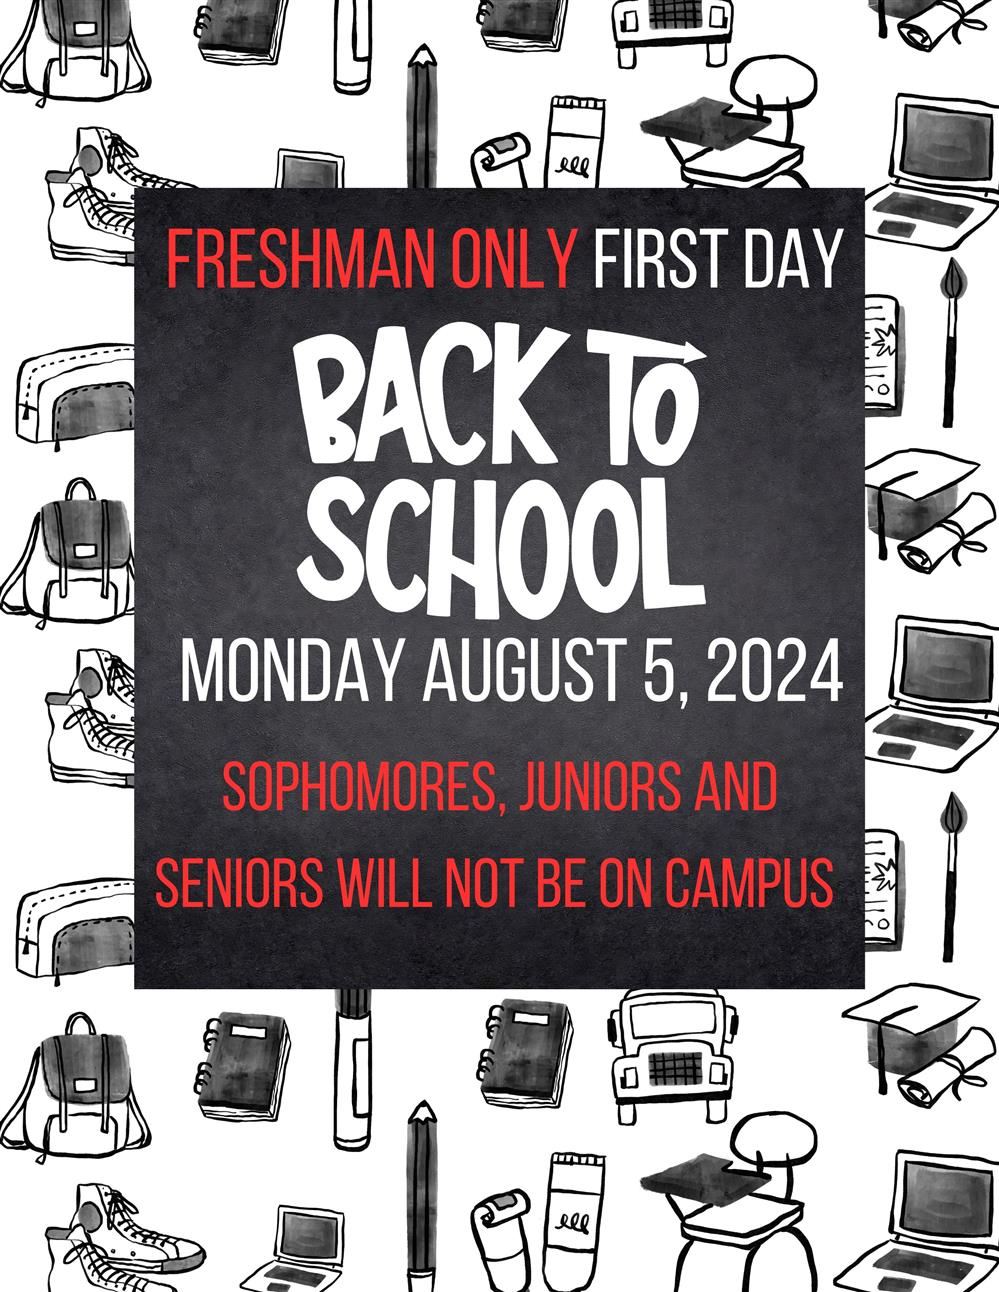  FRESHMAN ONLY FIRST DAY